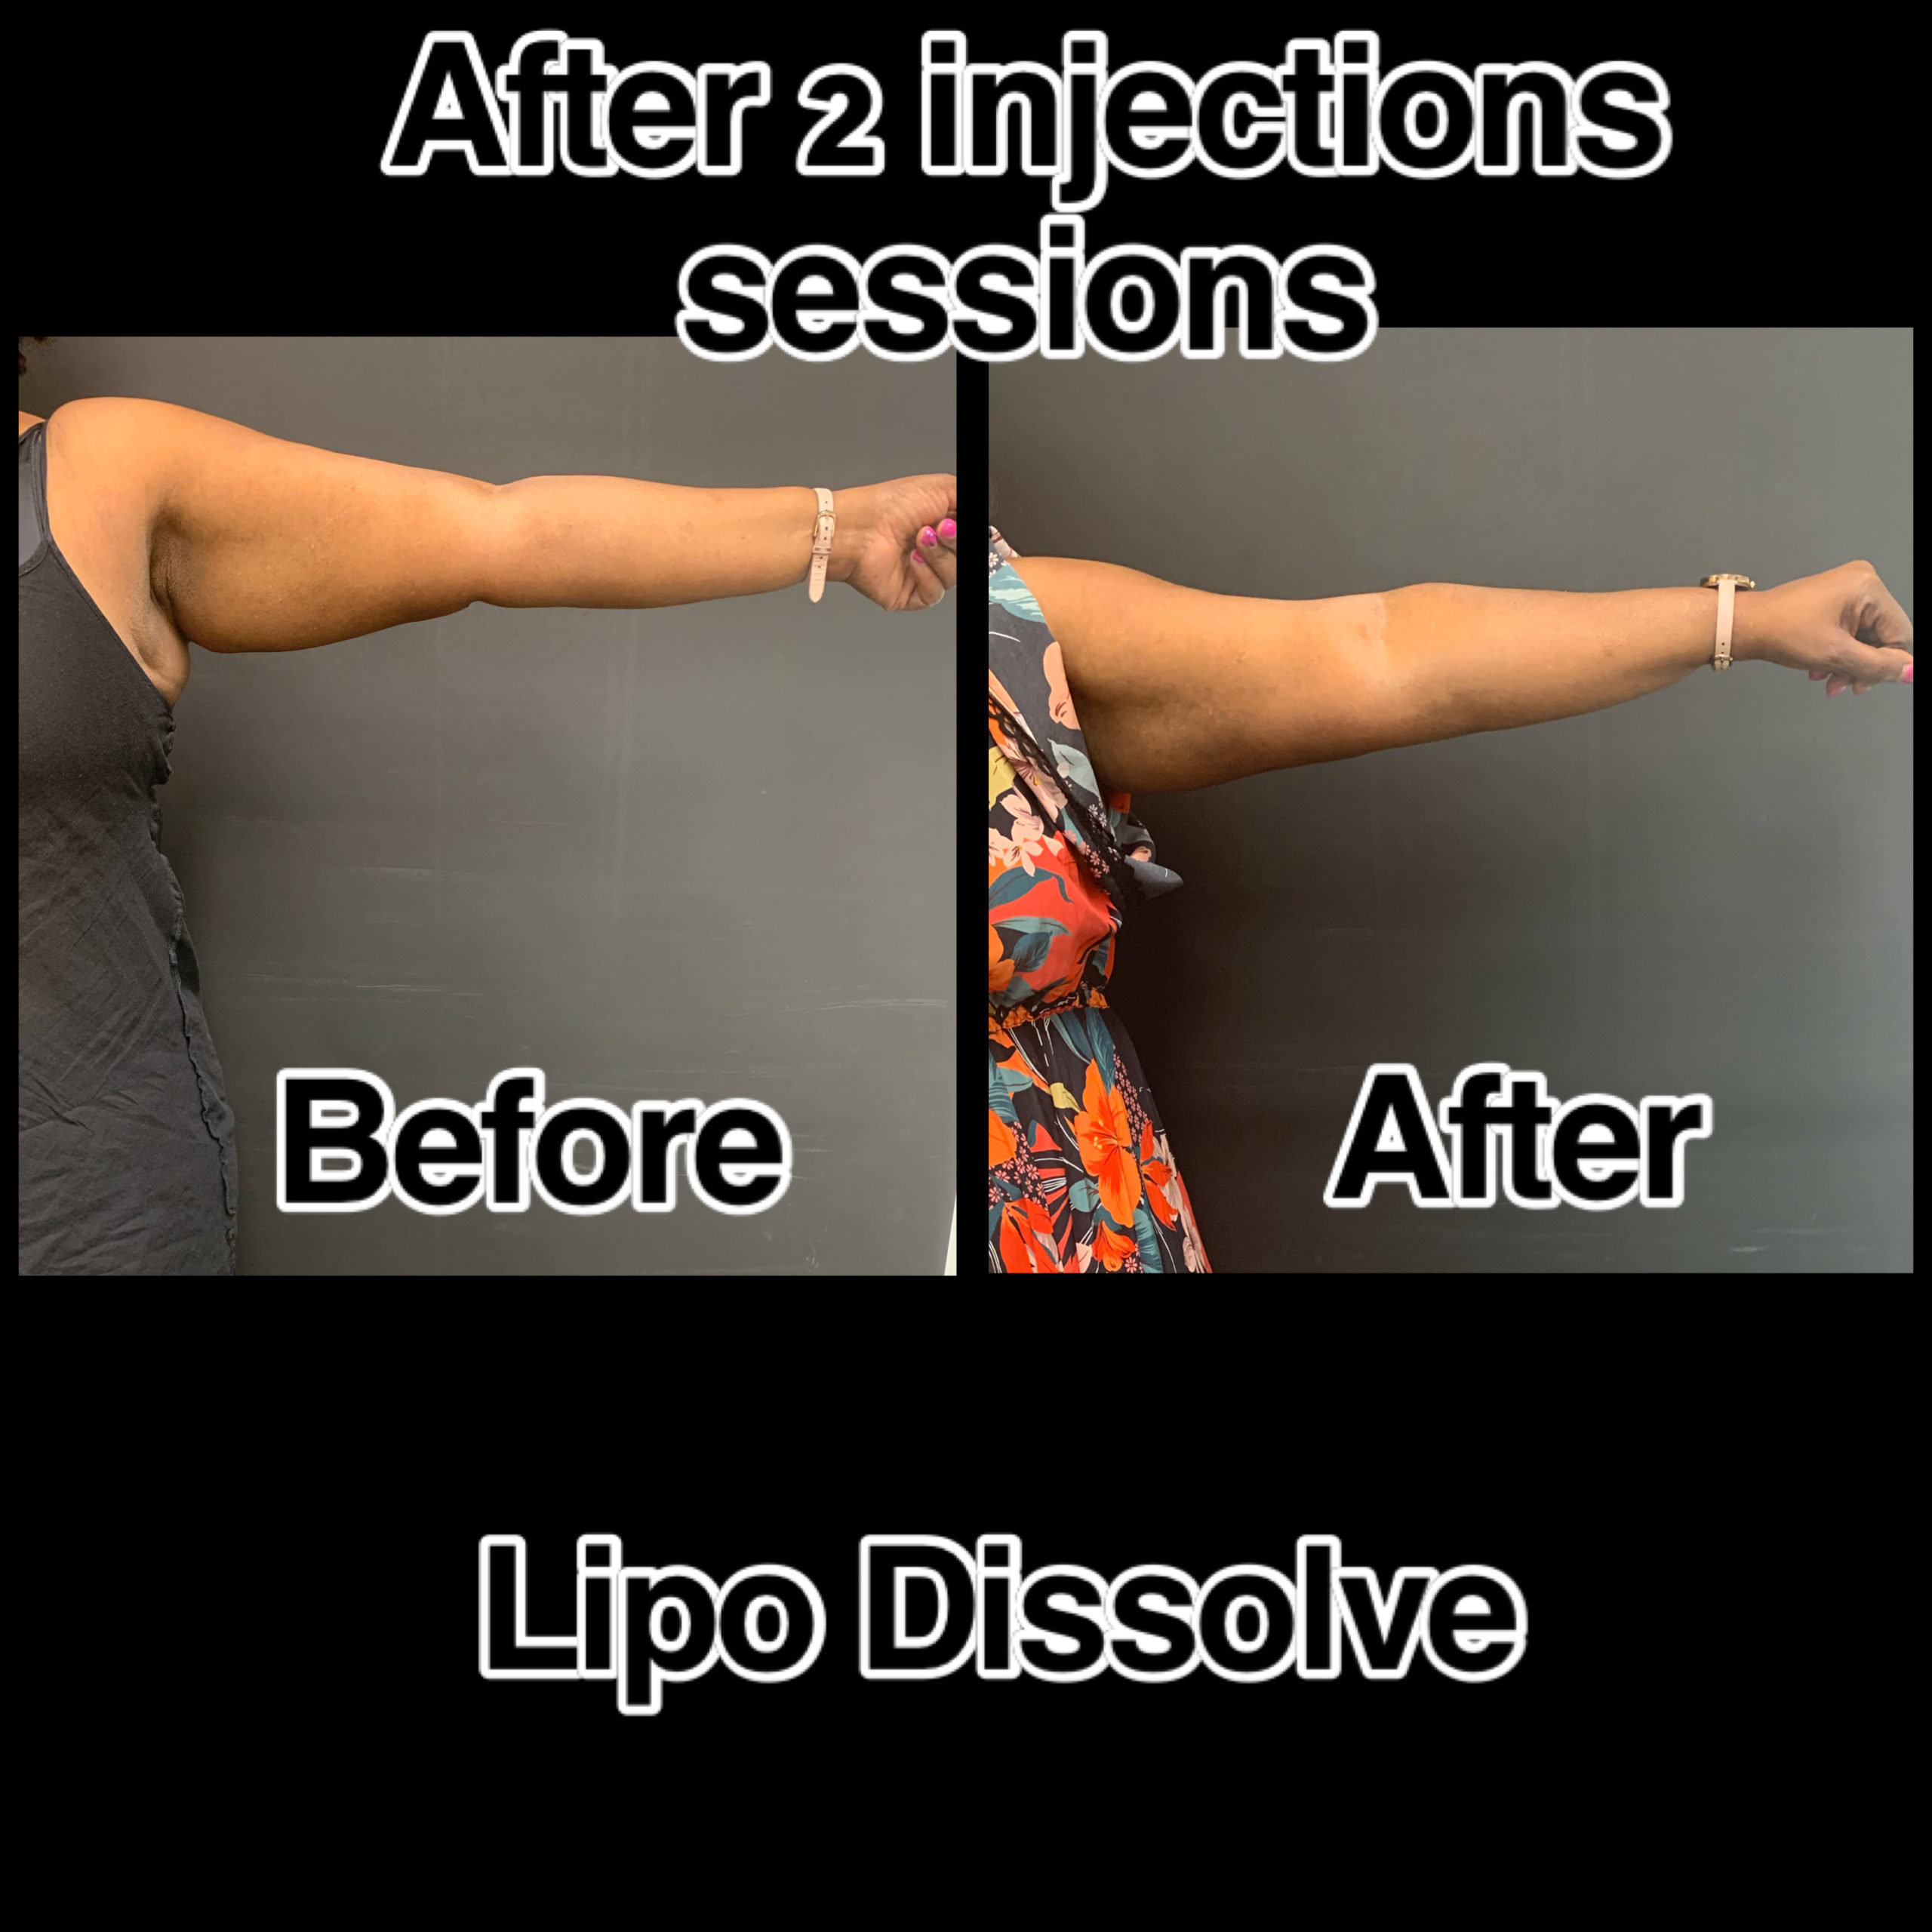 Mesotherapy Before & After Photos | The Better Body Shop MedSpa In Houston, TX